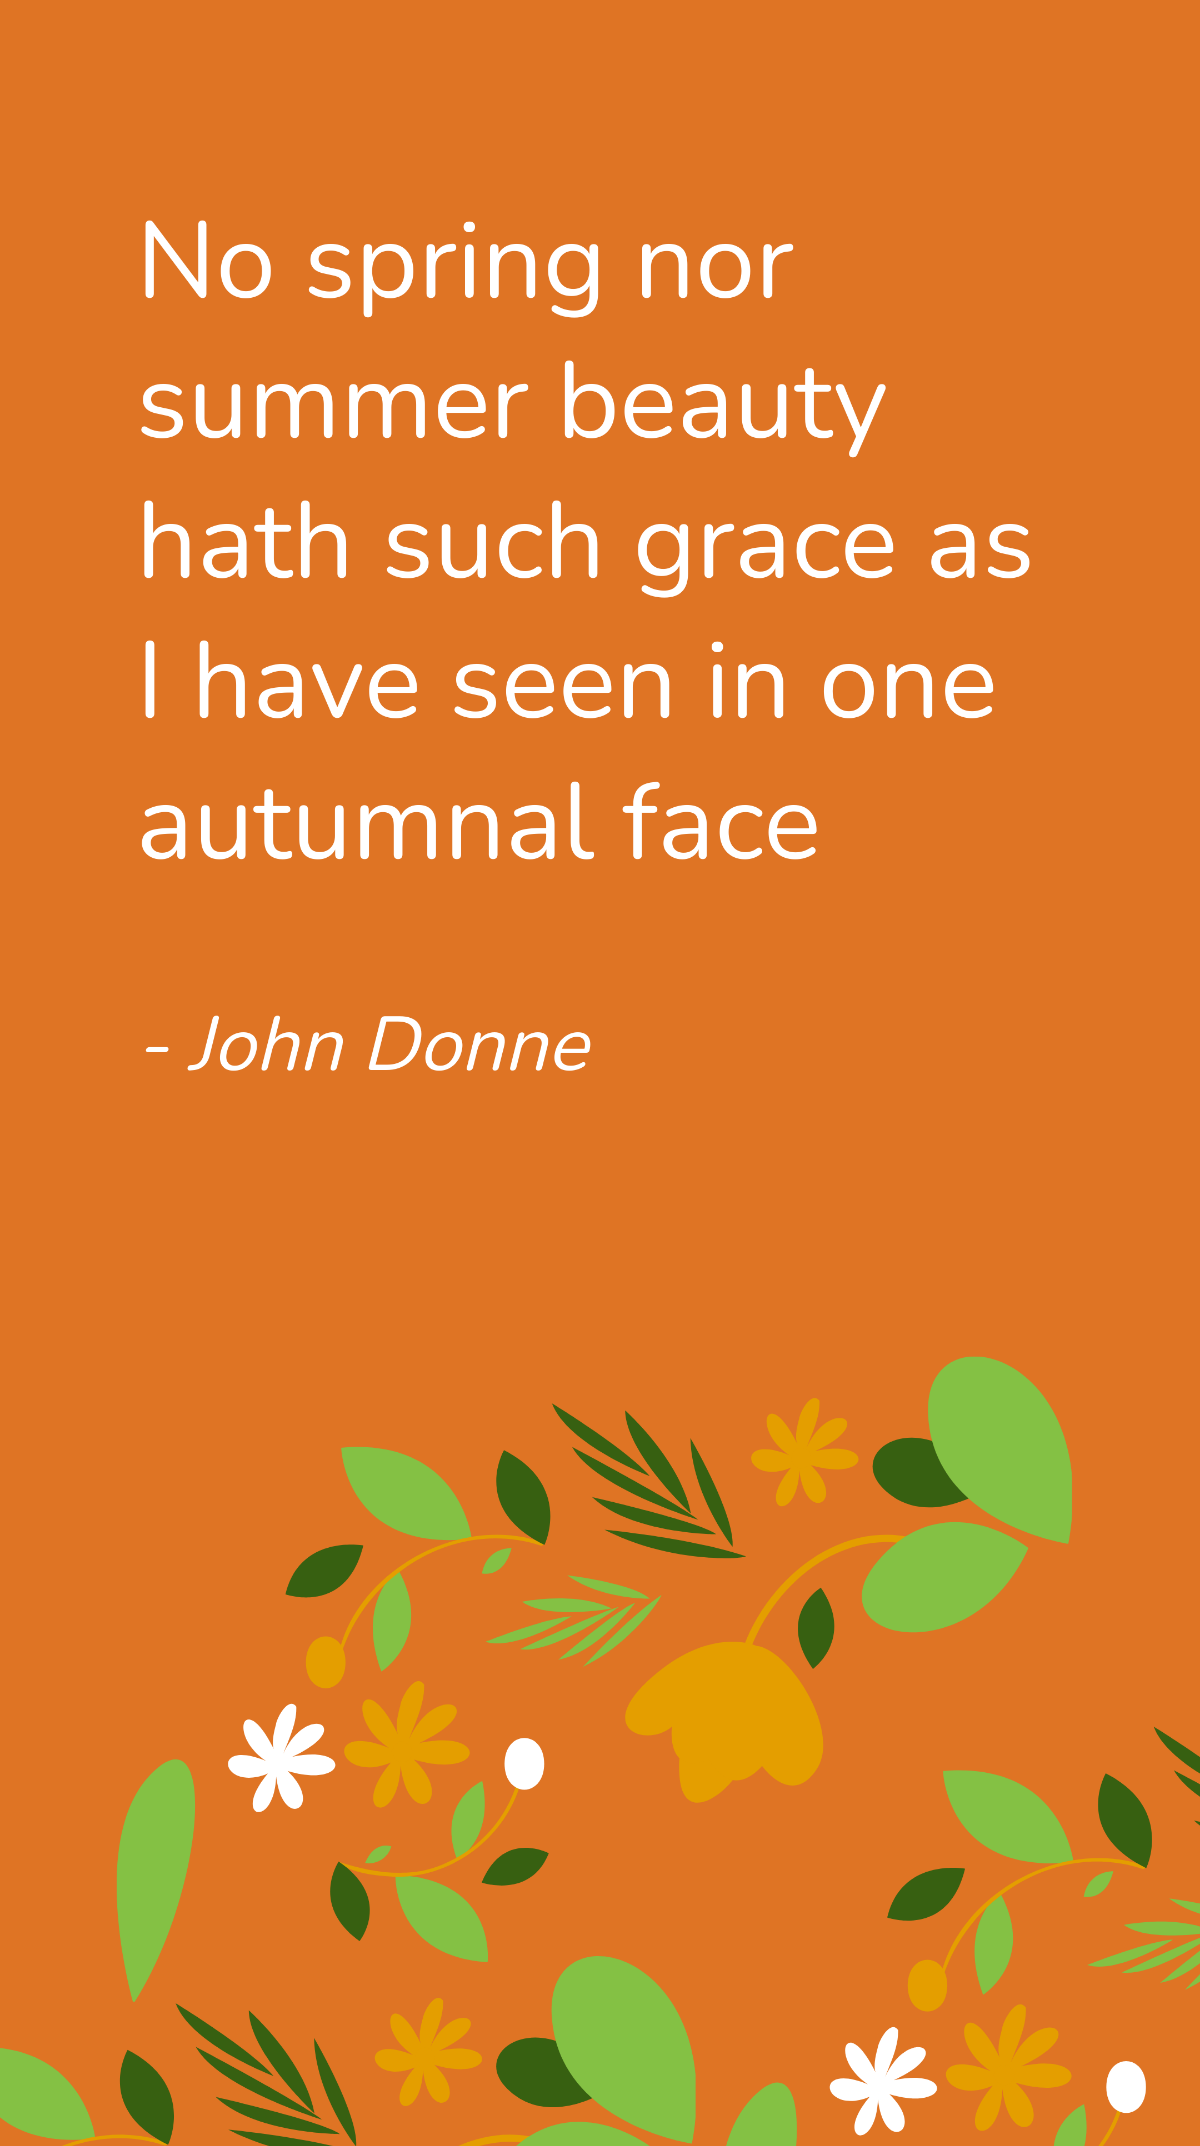 John Donne - No spring nor summer beauty hath such grace as I have seen in one autumnal face